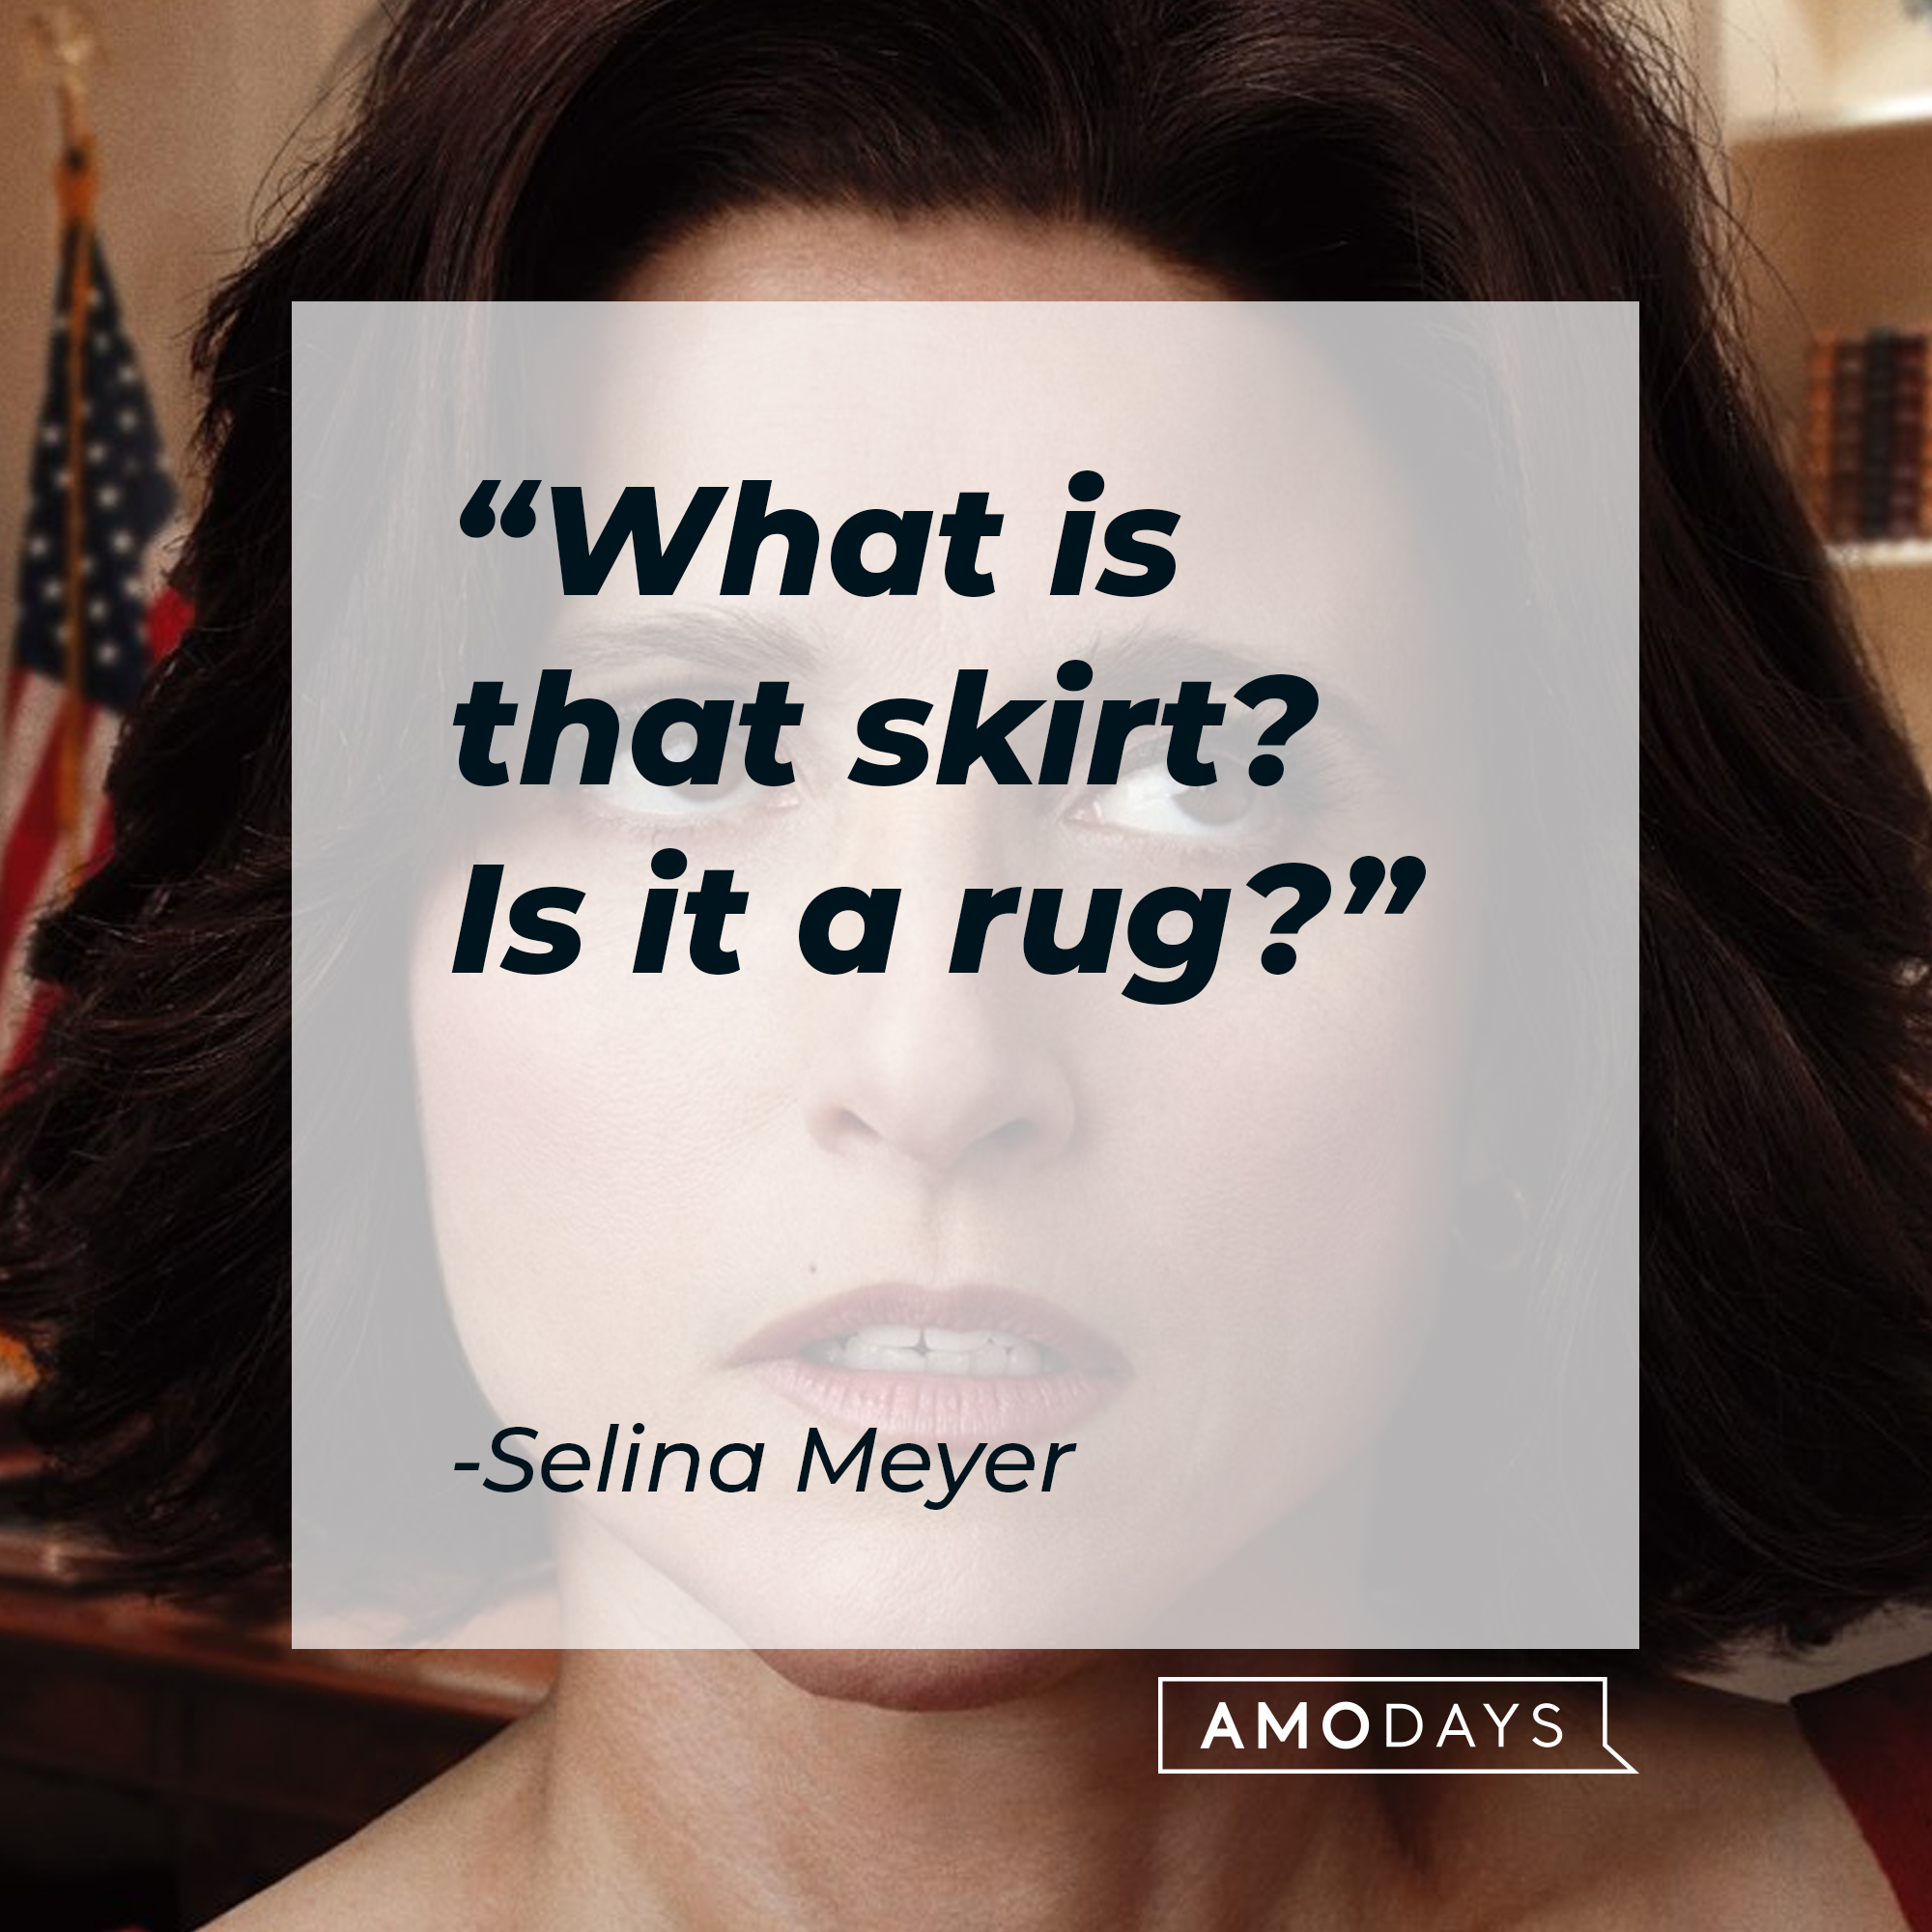 Selina Meyer, with her quote, “What is that skirt? Is it a rug?" | Source: Facebook.com/veep